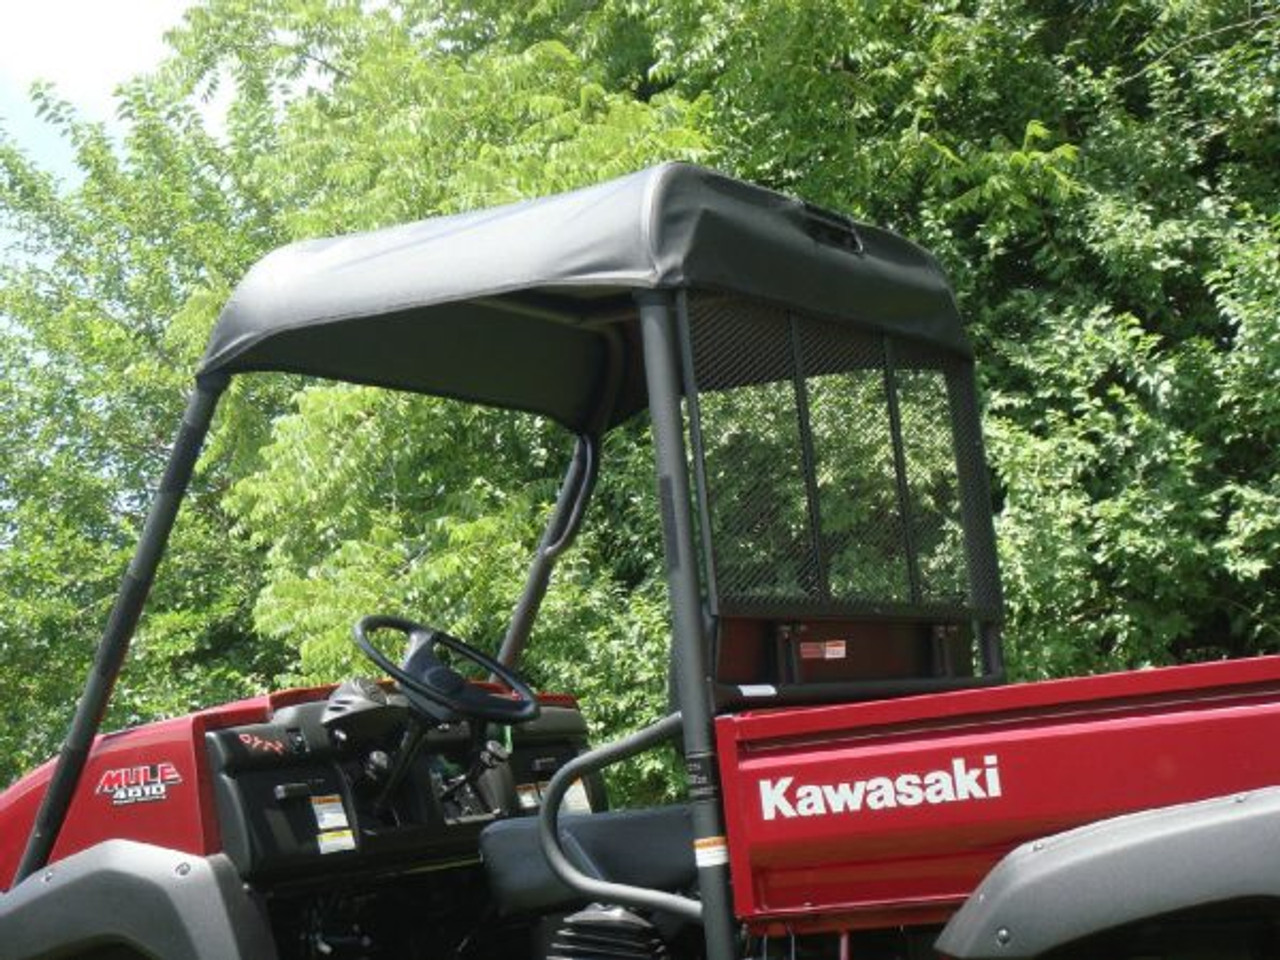 3 Star side x side Kawasaki Mule 4000/4010 soft top rear and side angle view